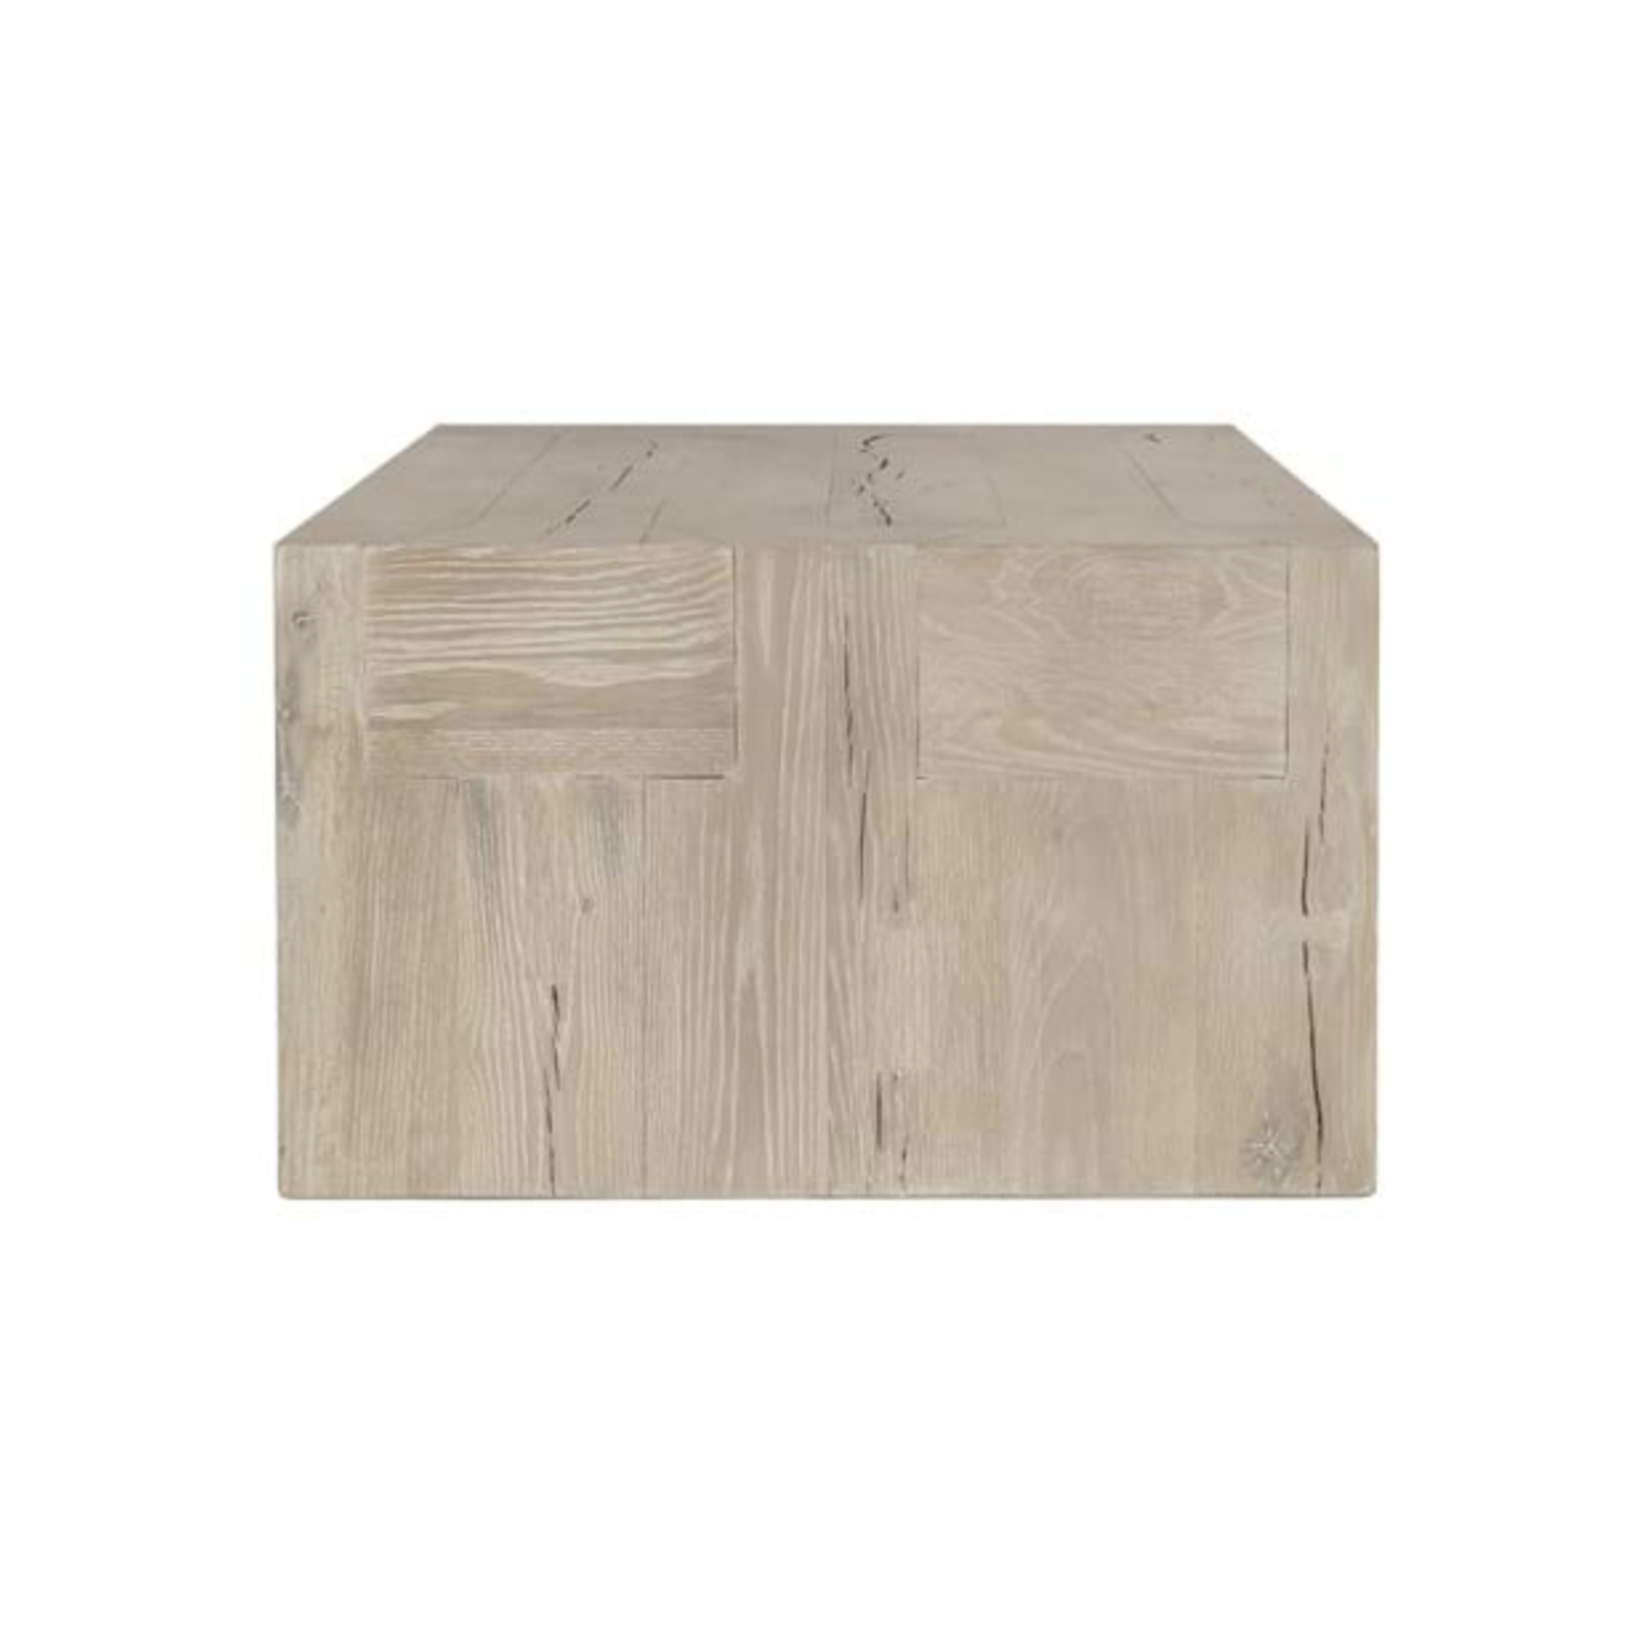 Outside The Box 60x30x18 Bristol Reclaimed Oak Coffee Table In White Wash